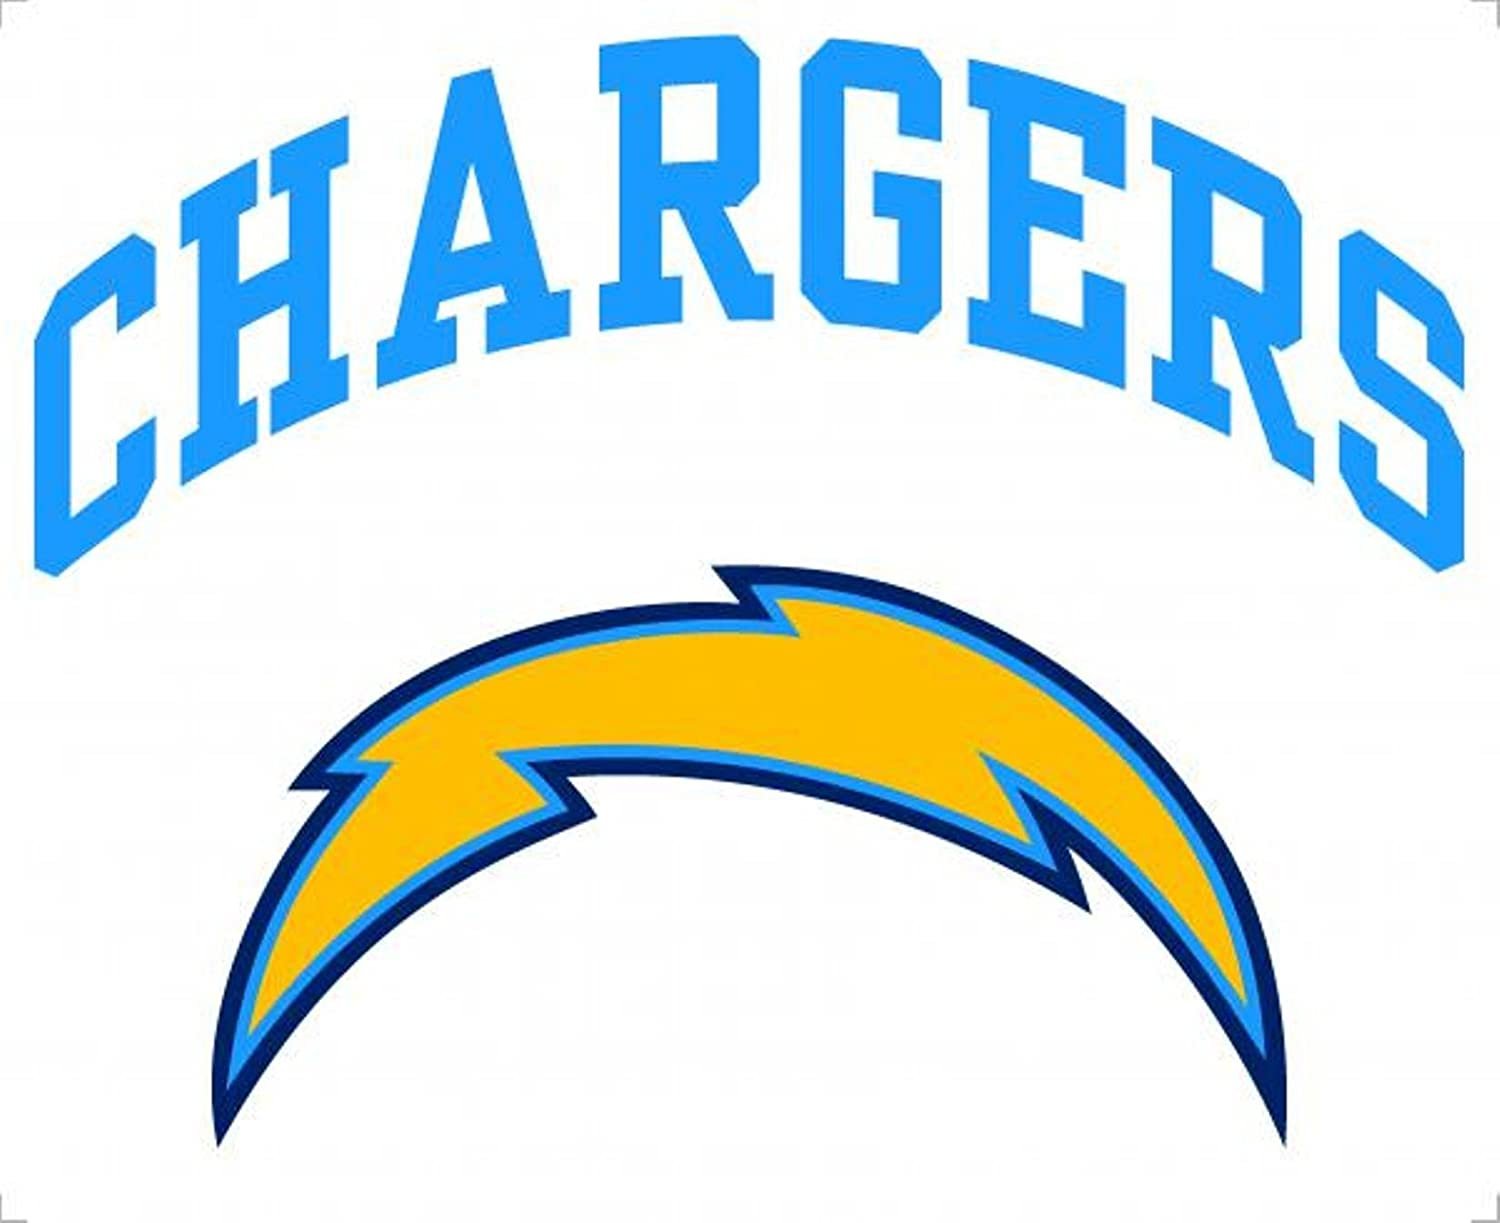 Los Angeles Chargers 8" Arched Decal Flat Vinyl Reusable Repositionable Auto Home Football